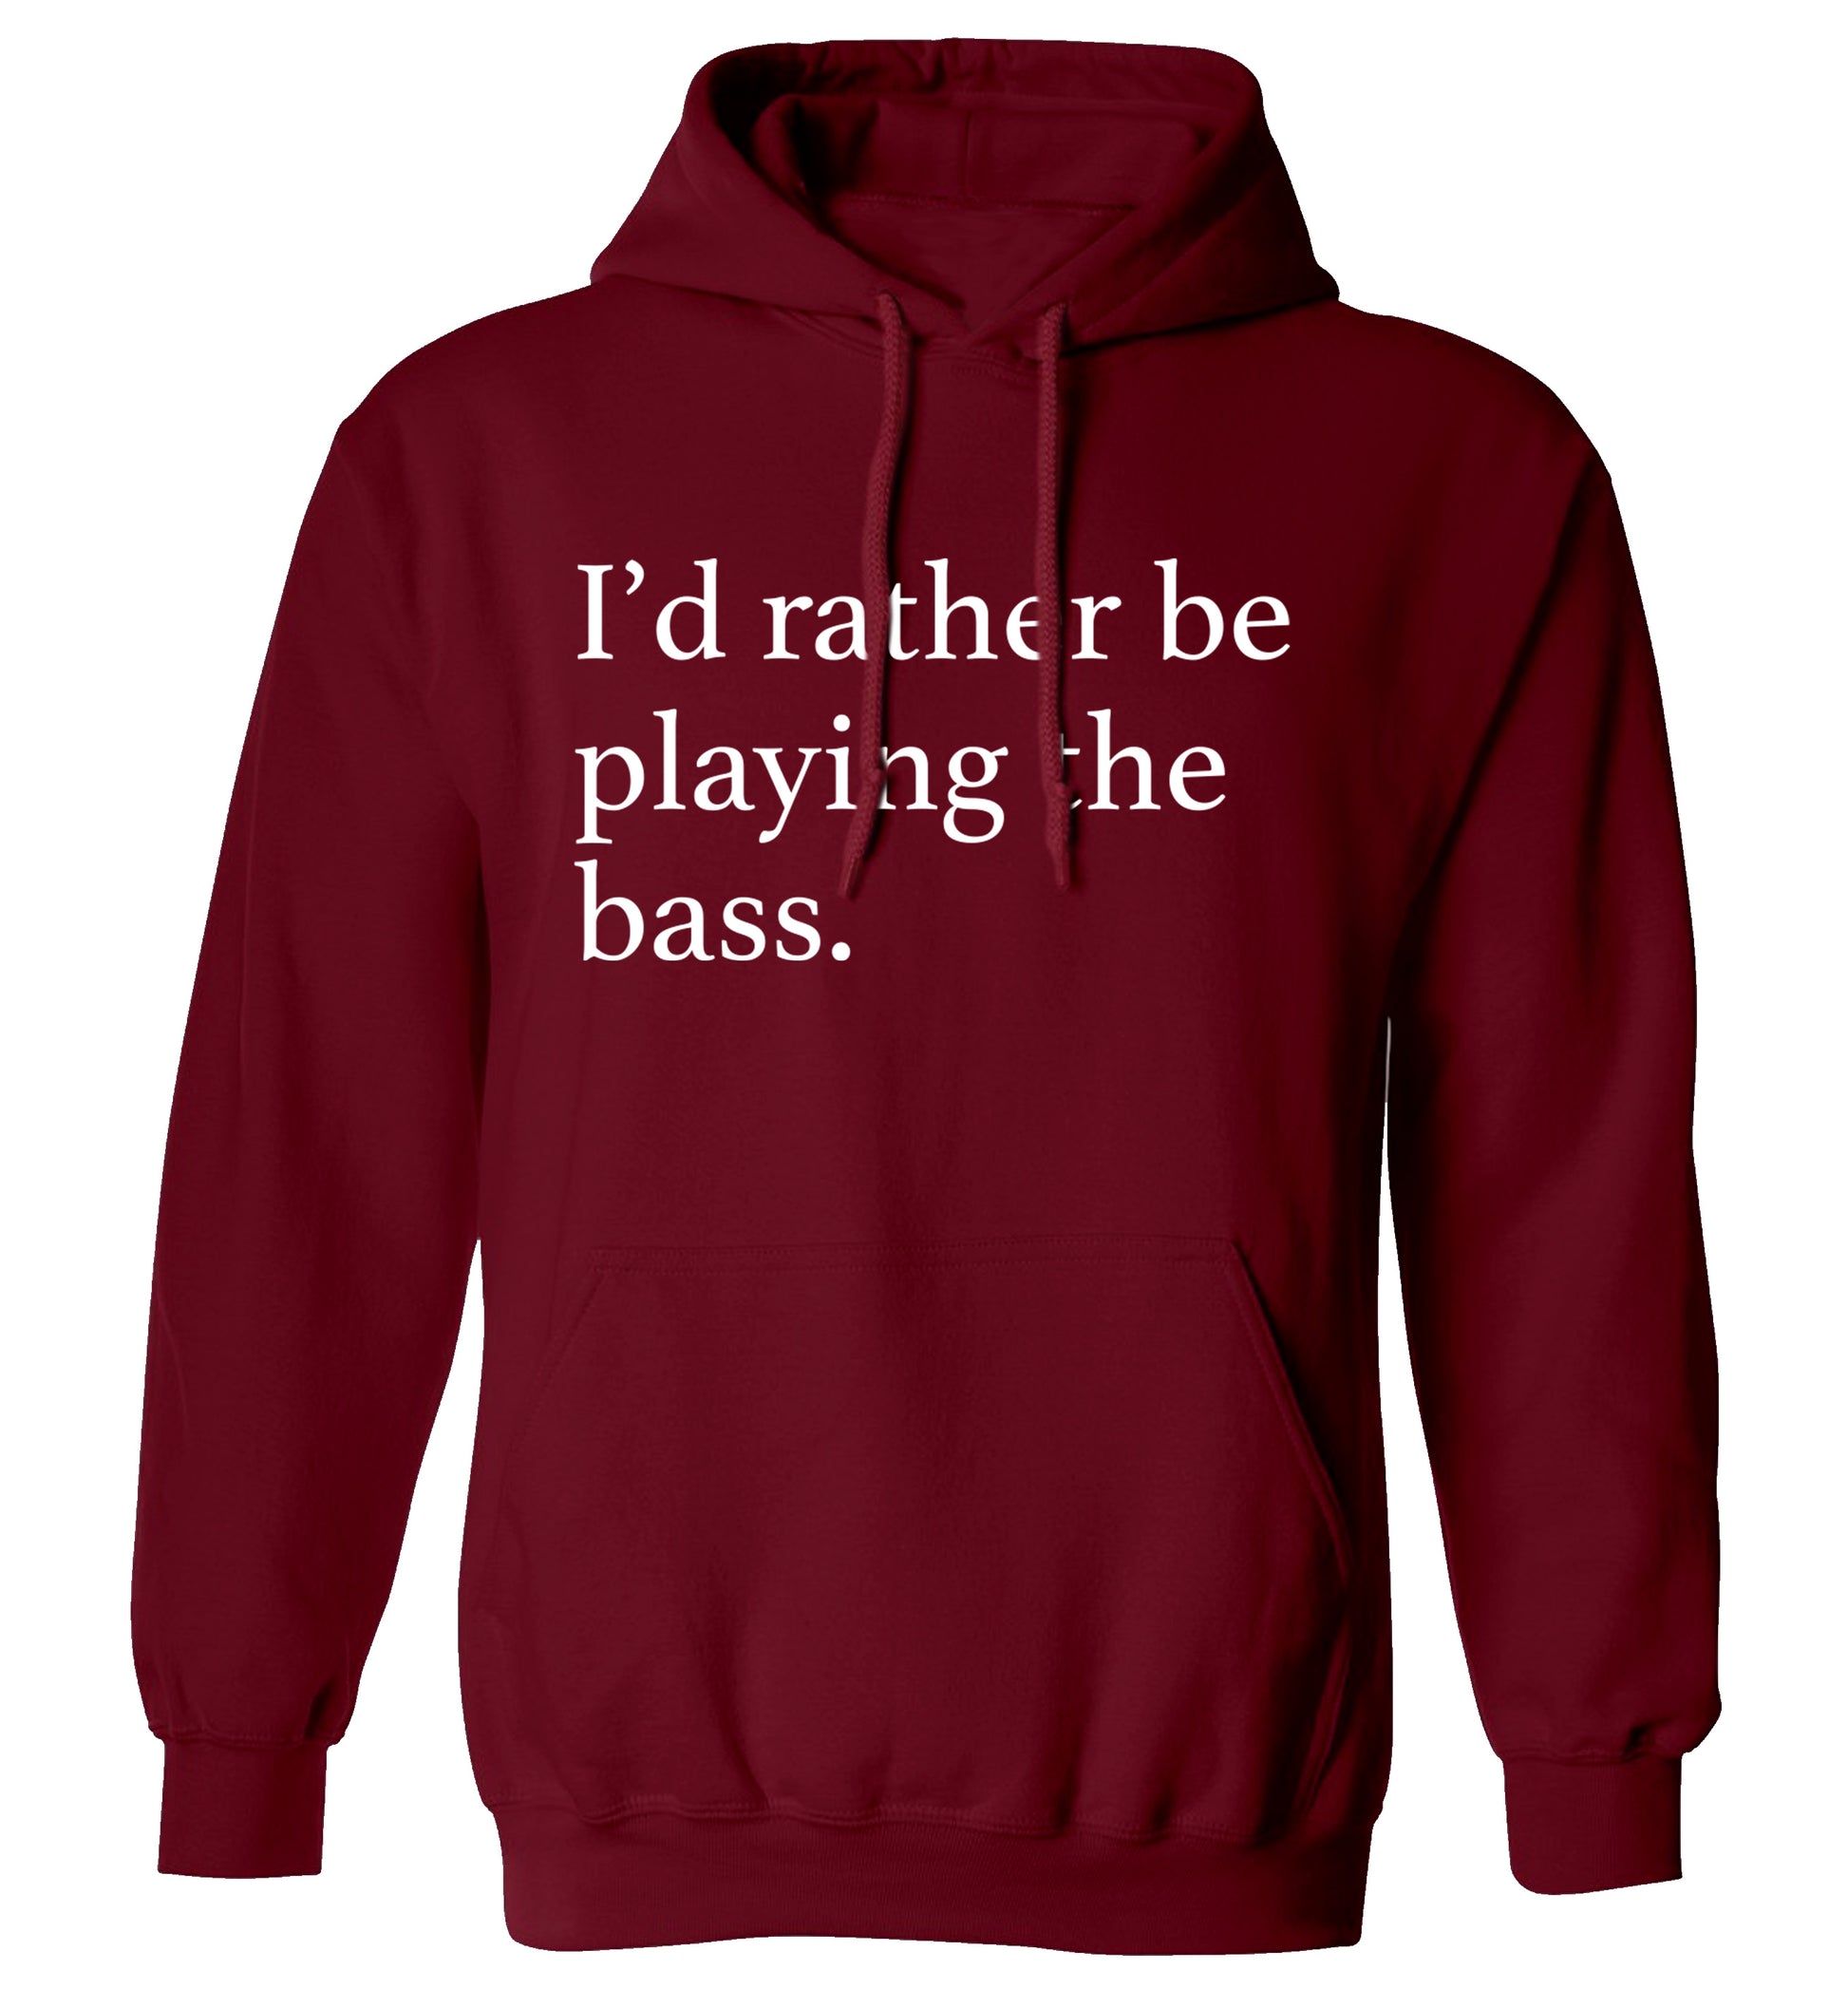 I'd rather by playing the bass adults unisex maroon hoodie 2XL